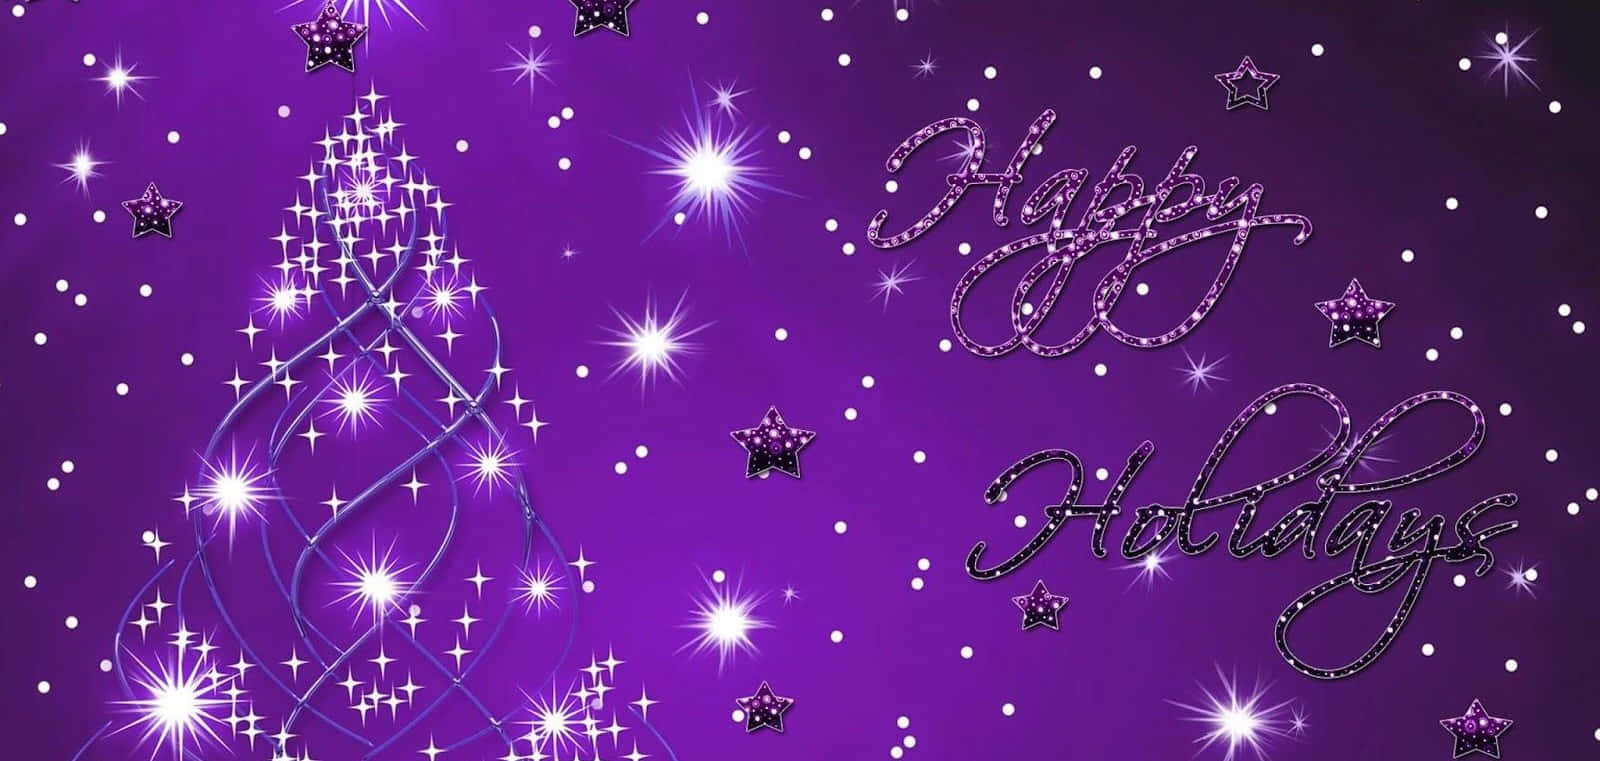 Festive Greetings Background with Sparkling Stars and Typography